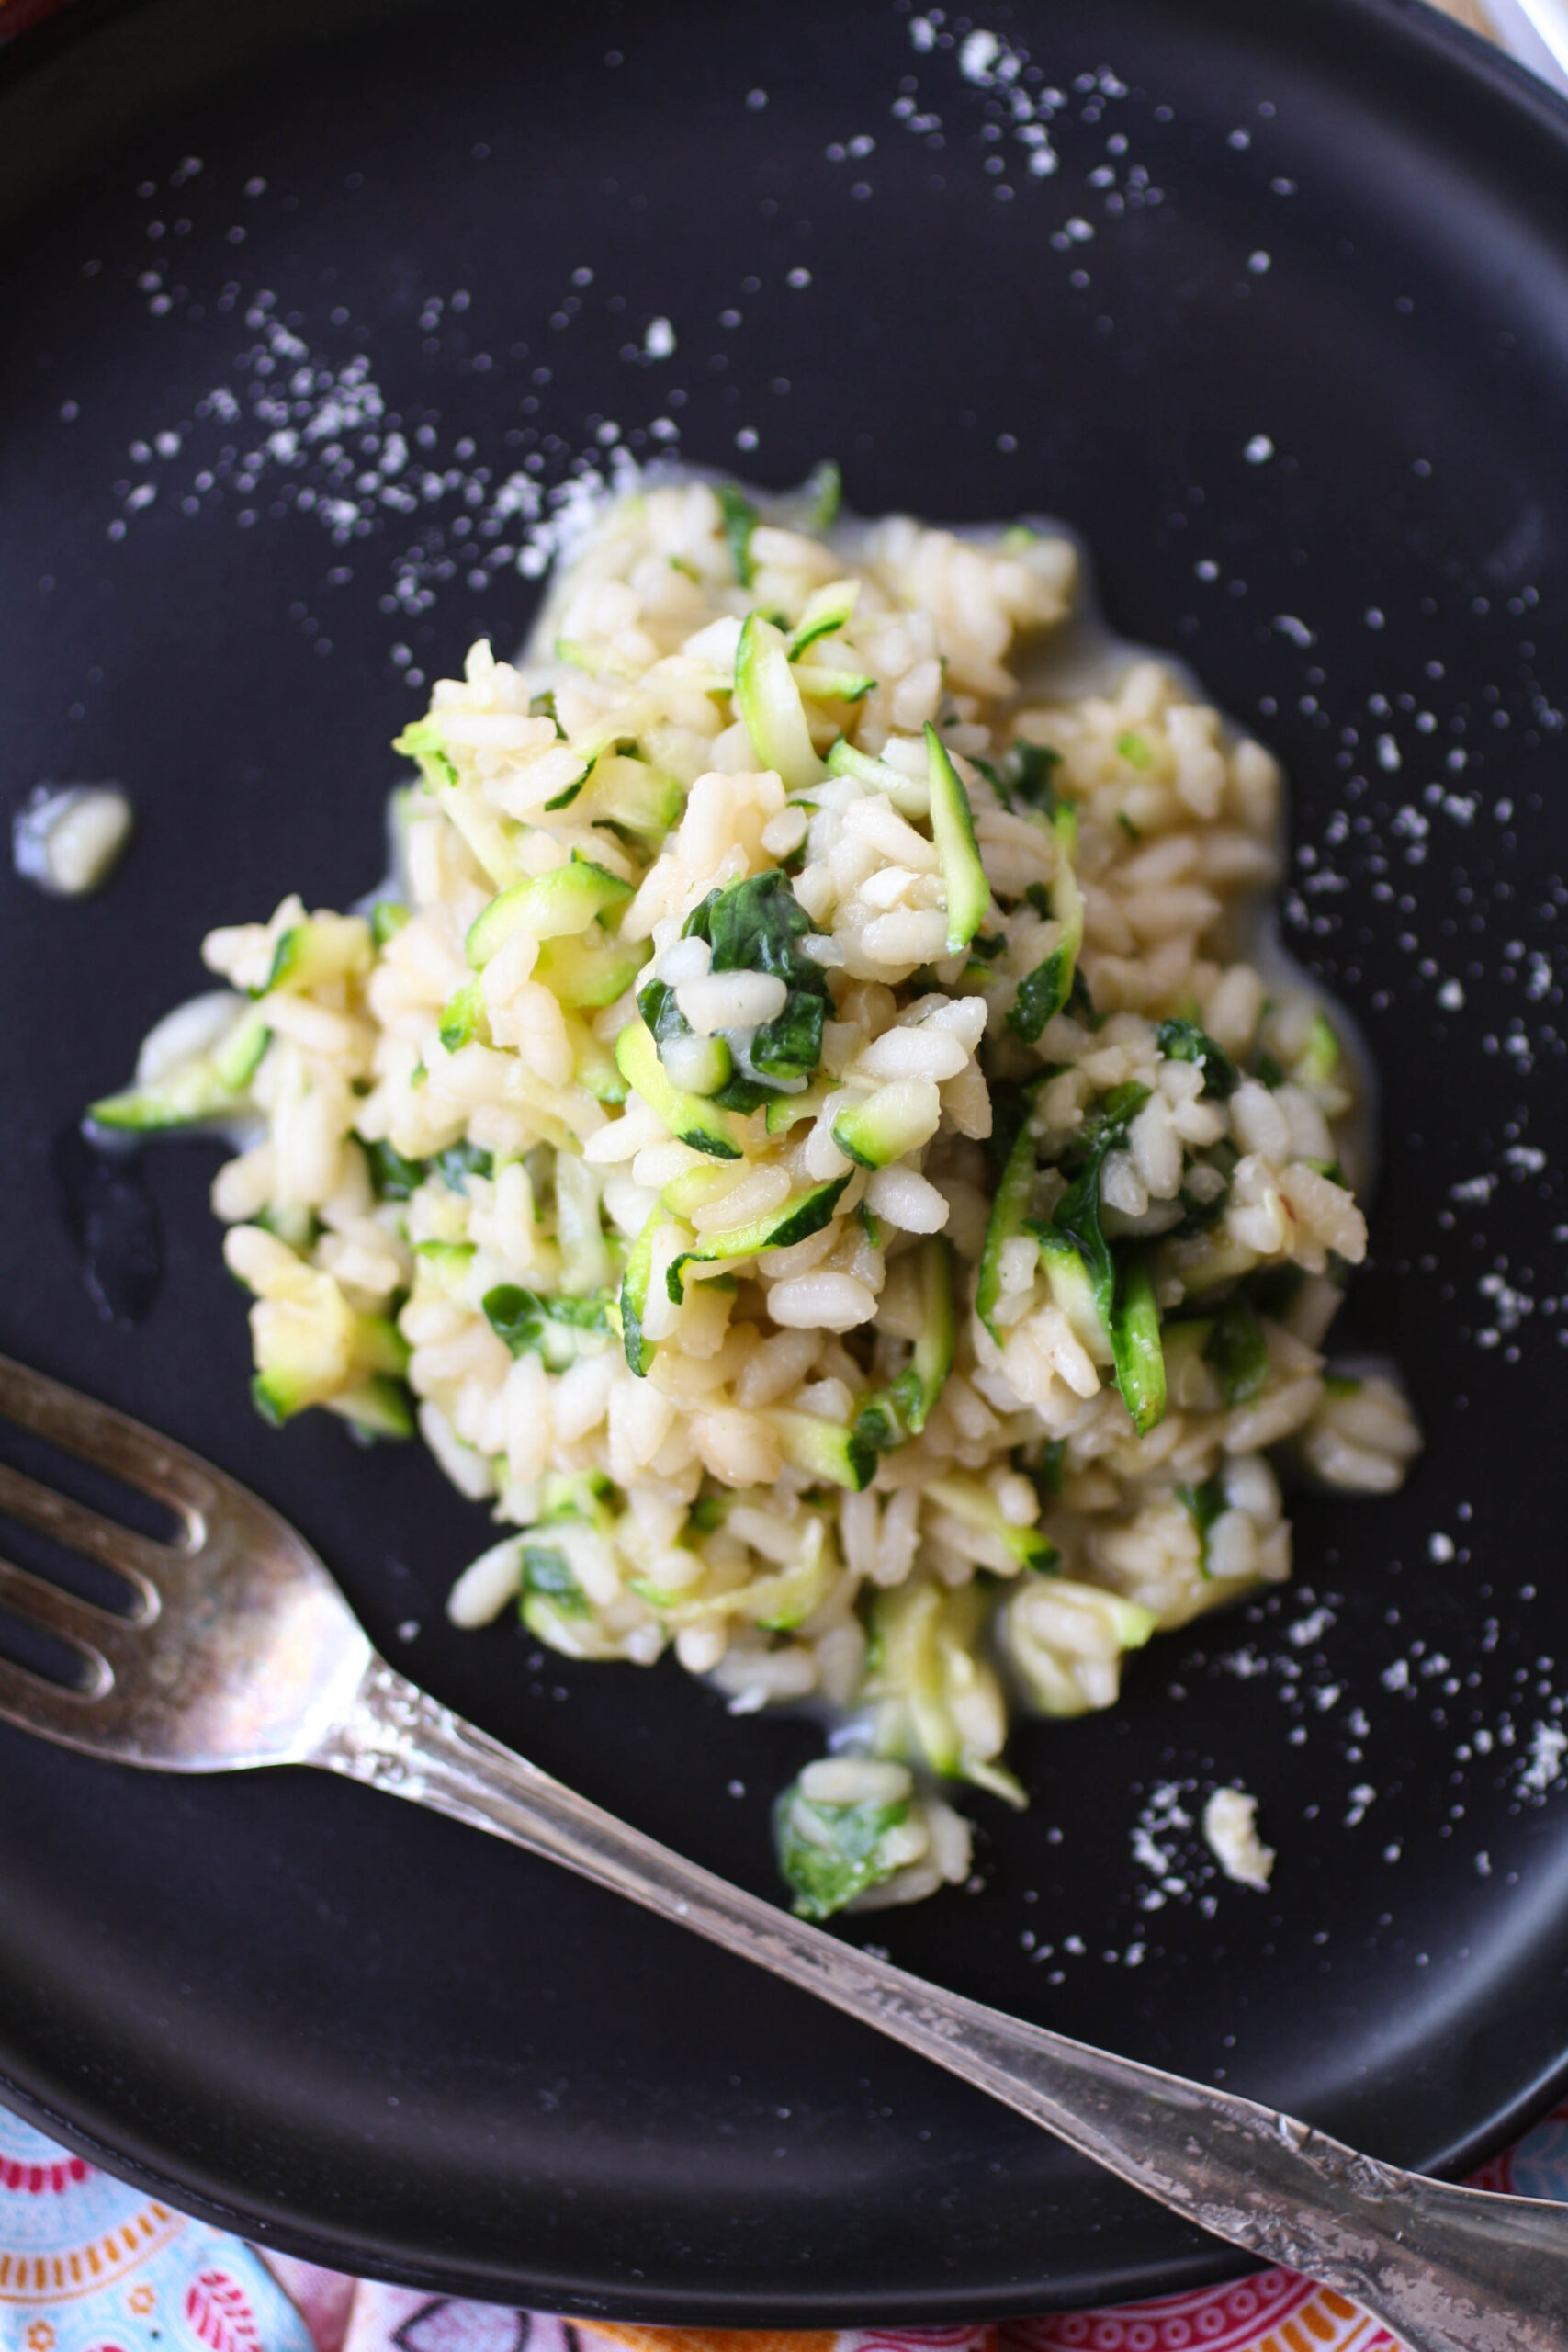 You'll love this amazing Summer Zucchini Risotto dish that's creamy and filling!